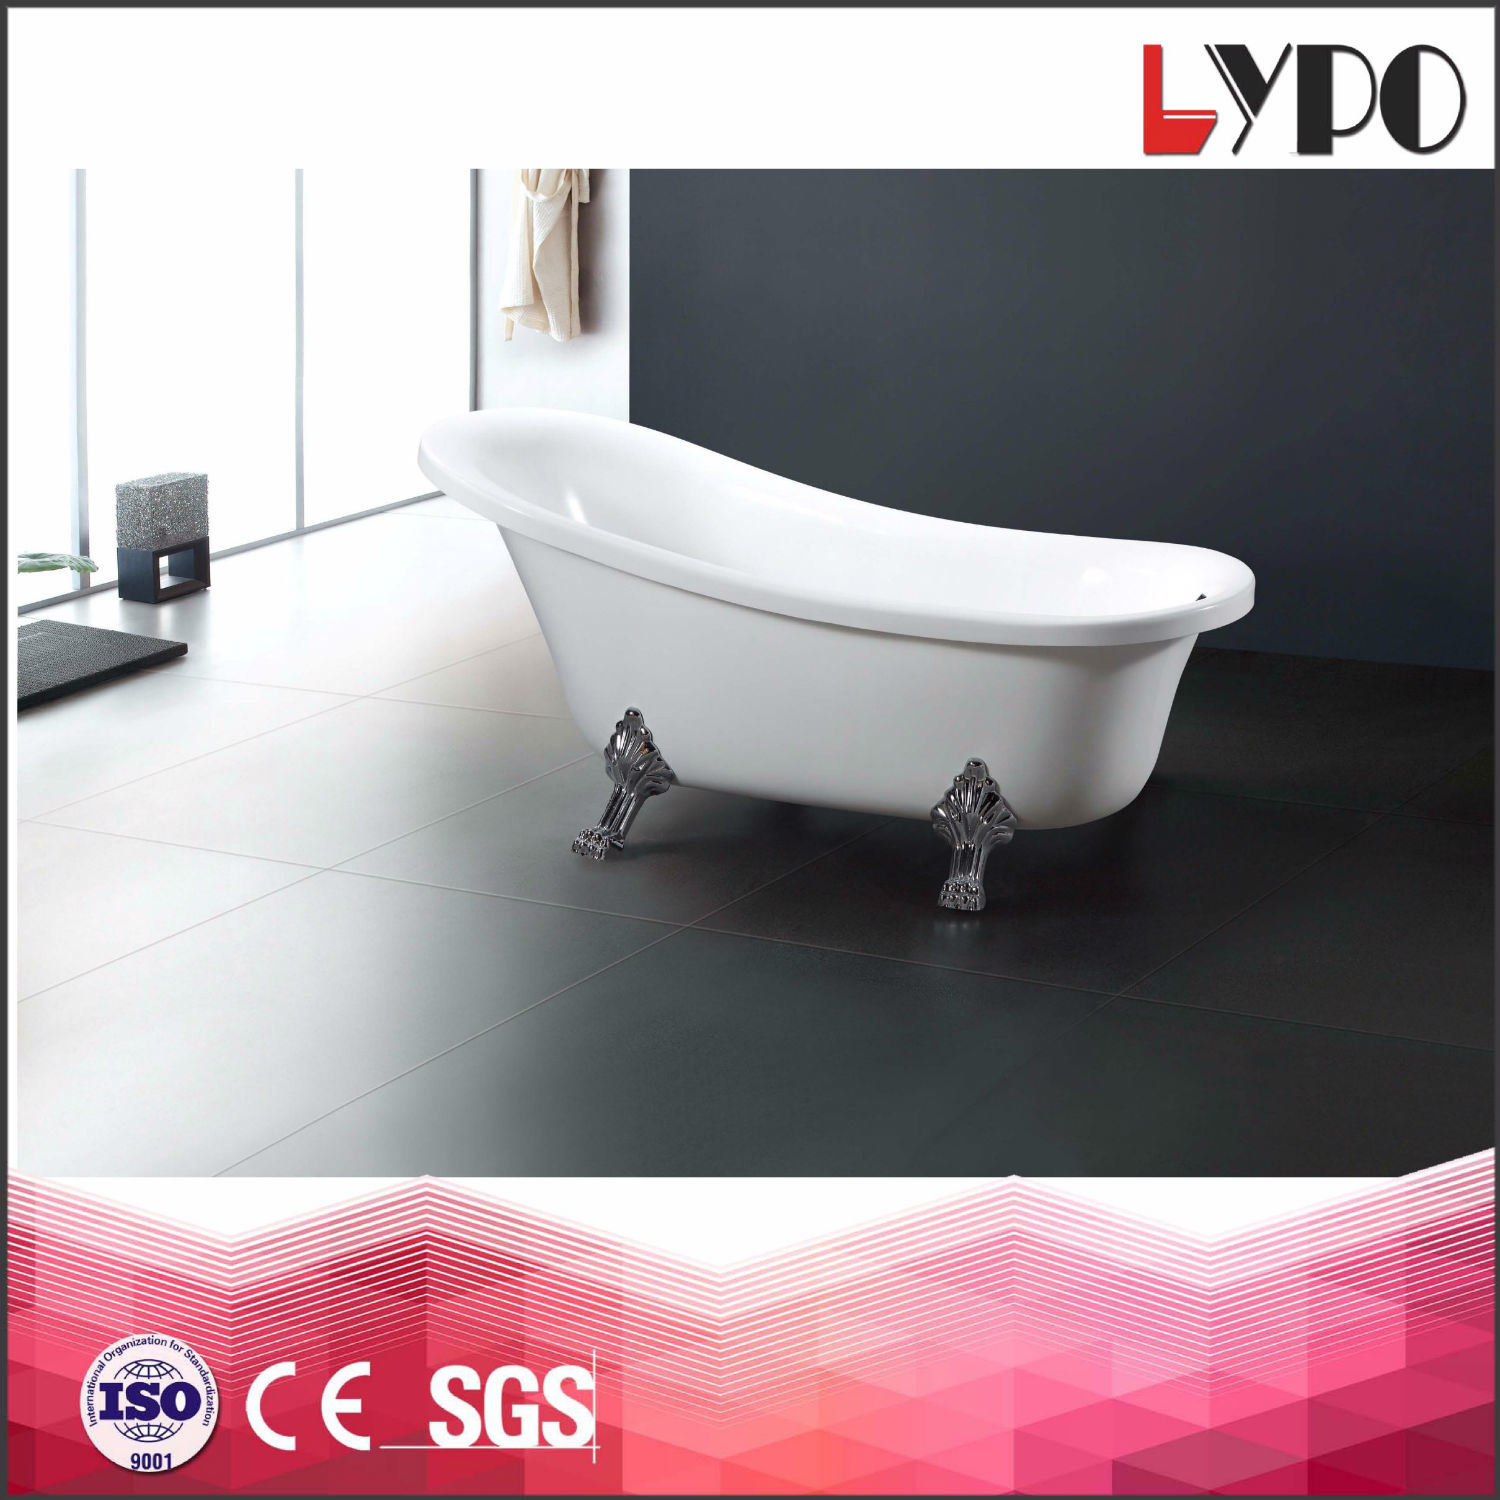 K-8881 Foshan Factory Cheap Freestanding Bathtub/Clawfoot Tubs Prices, Sanitary Ware Bath Tubs with Apron for Two People